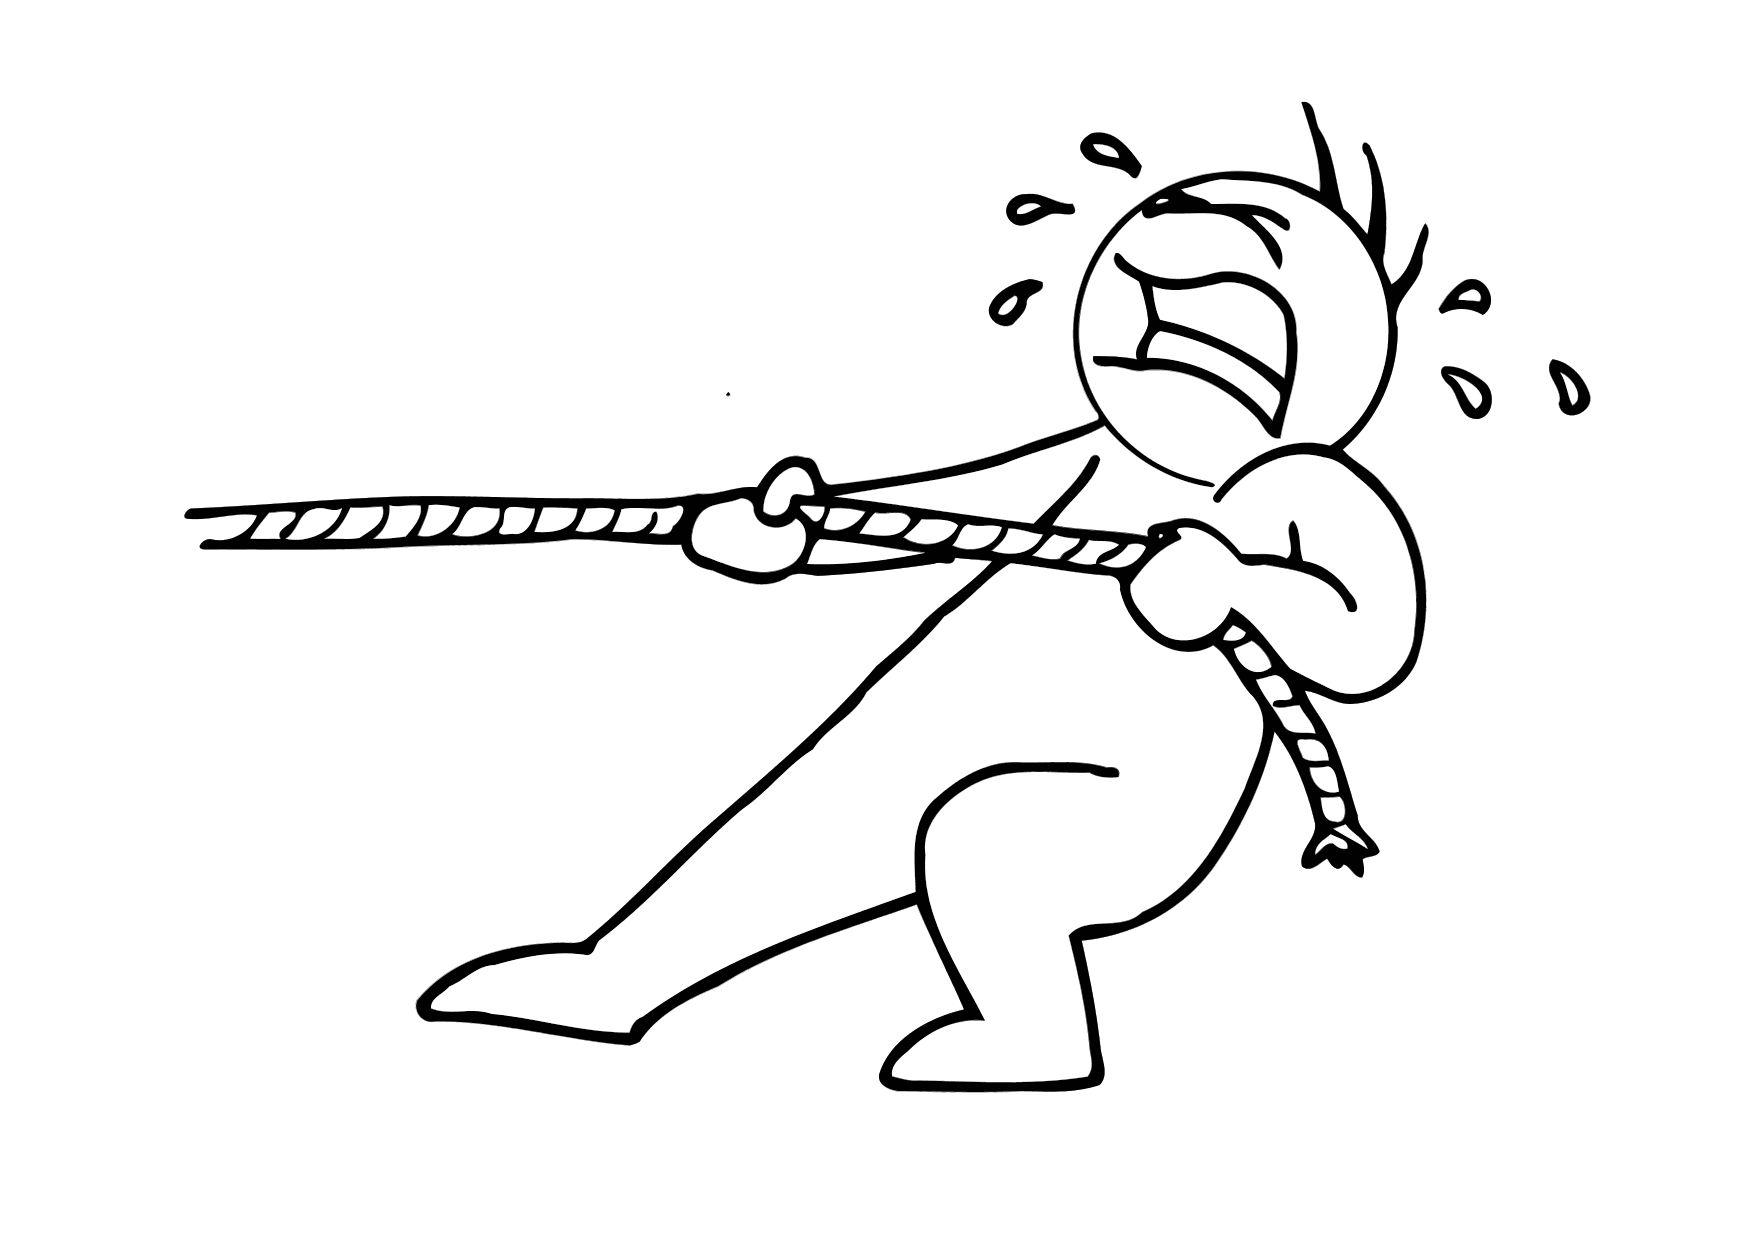 Coloring page 03b. rope pulling